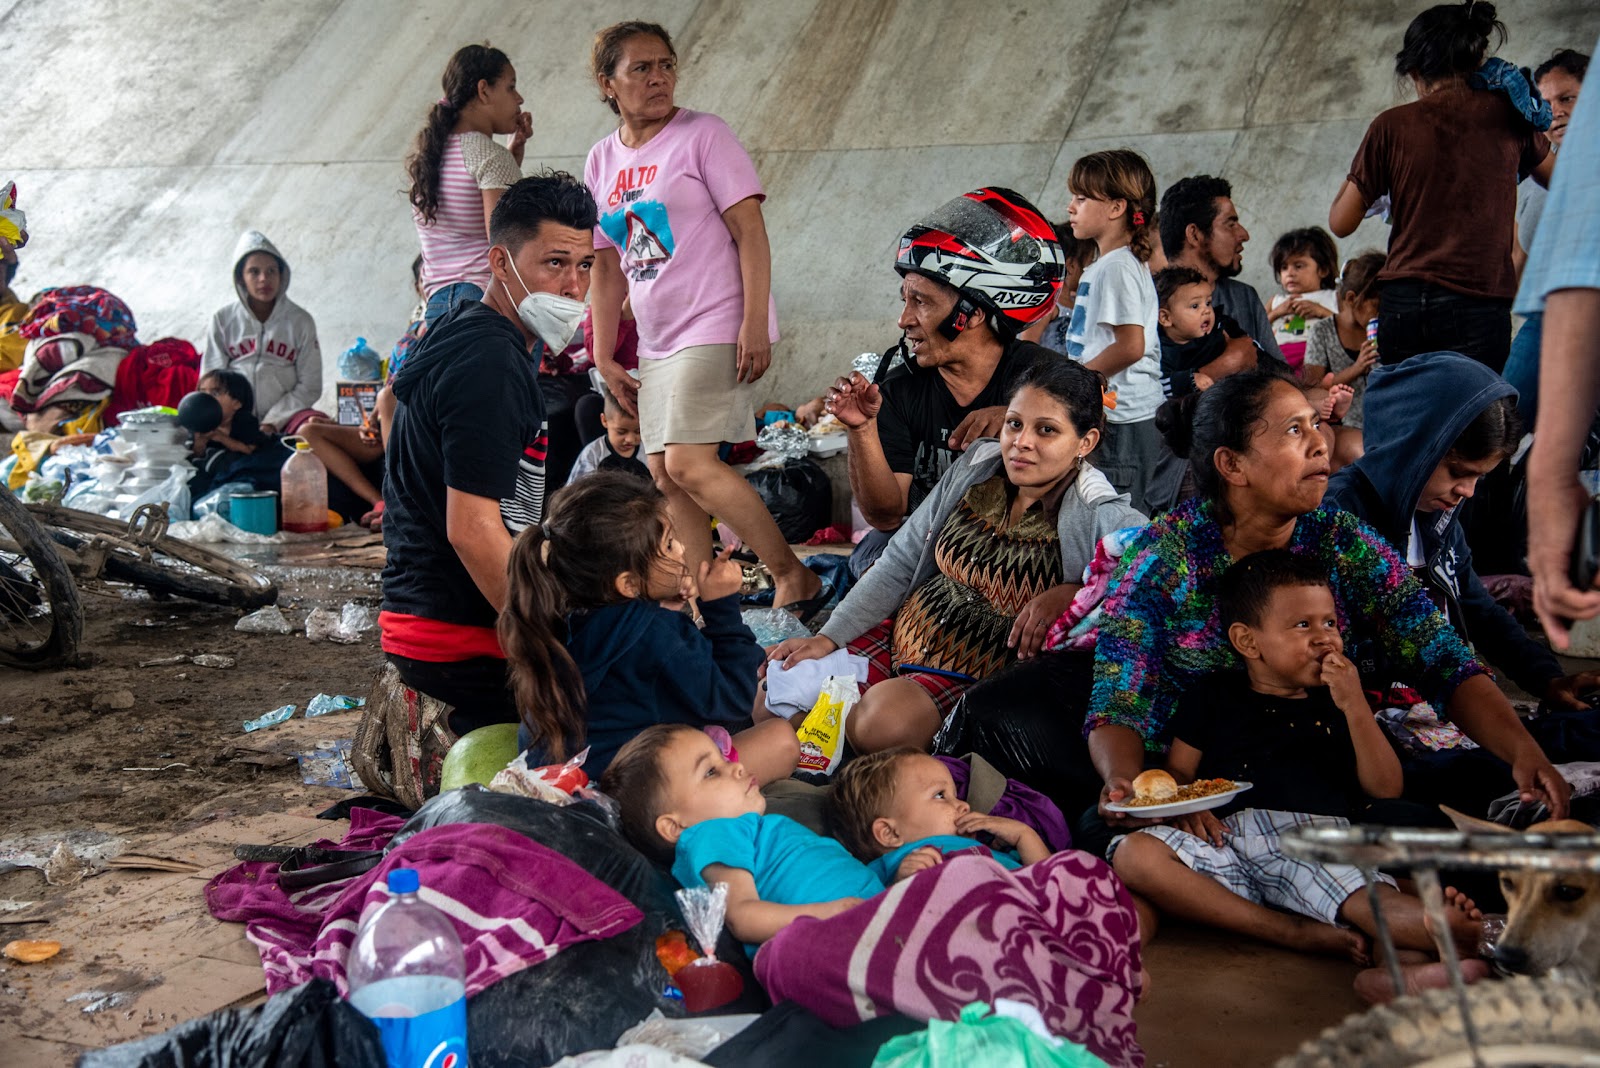 People who were forced to abandon their homes in the San Pedro Sula Valley due to floods in the aftermath of Hurricane Eta take refuge in a makeshift camp underneath an overpass in Chemelecon. Credit: Seth Sidney Berry/SOPA Images/LightRocket via Getty Images